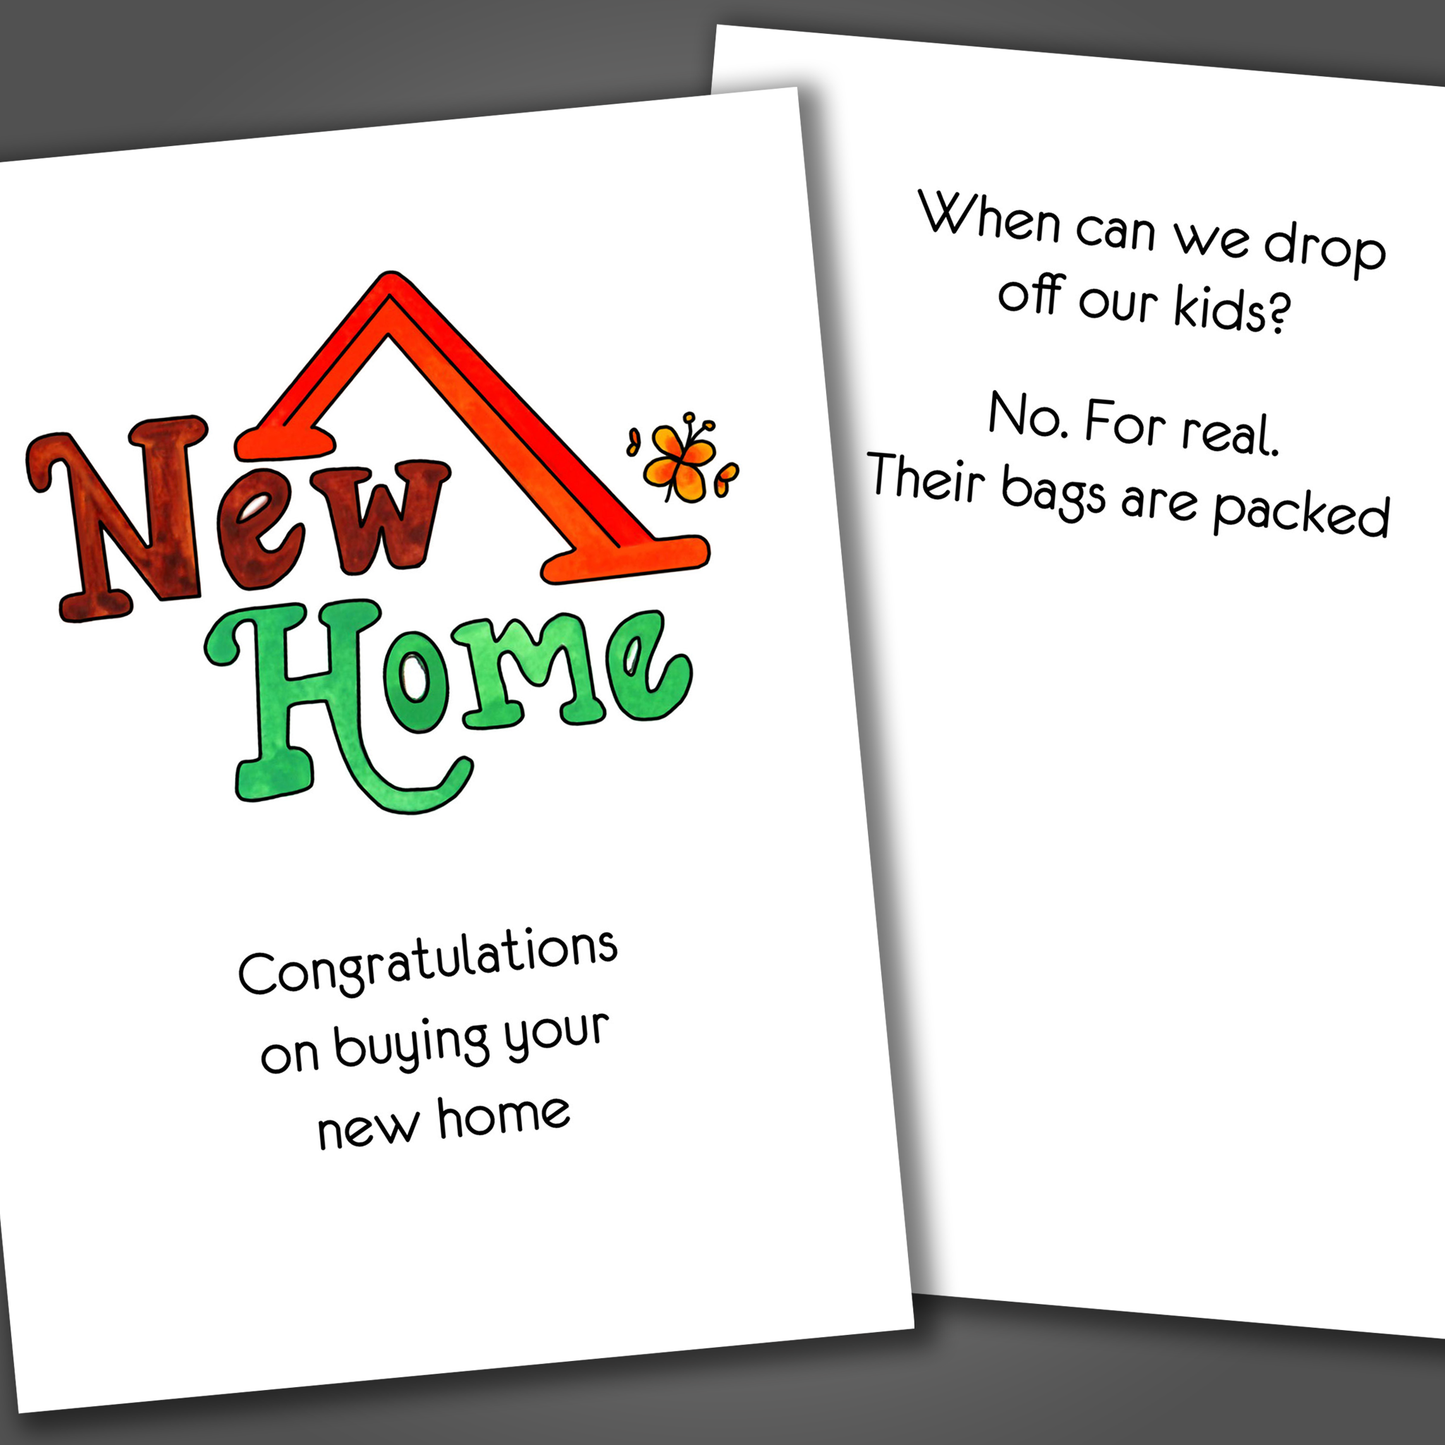 Funny new home congratulations card with a red roof drawn on the front of the card. Inside the card is a funny joke that asks when can we drop off our kids?